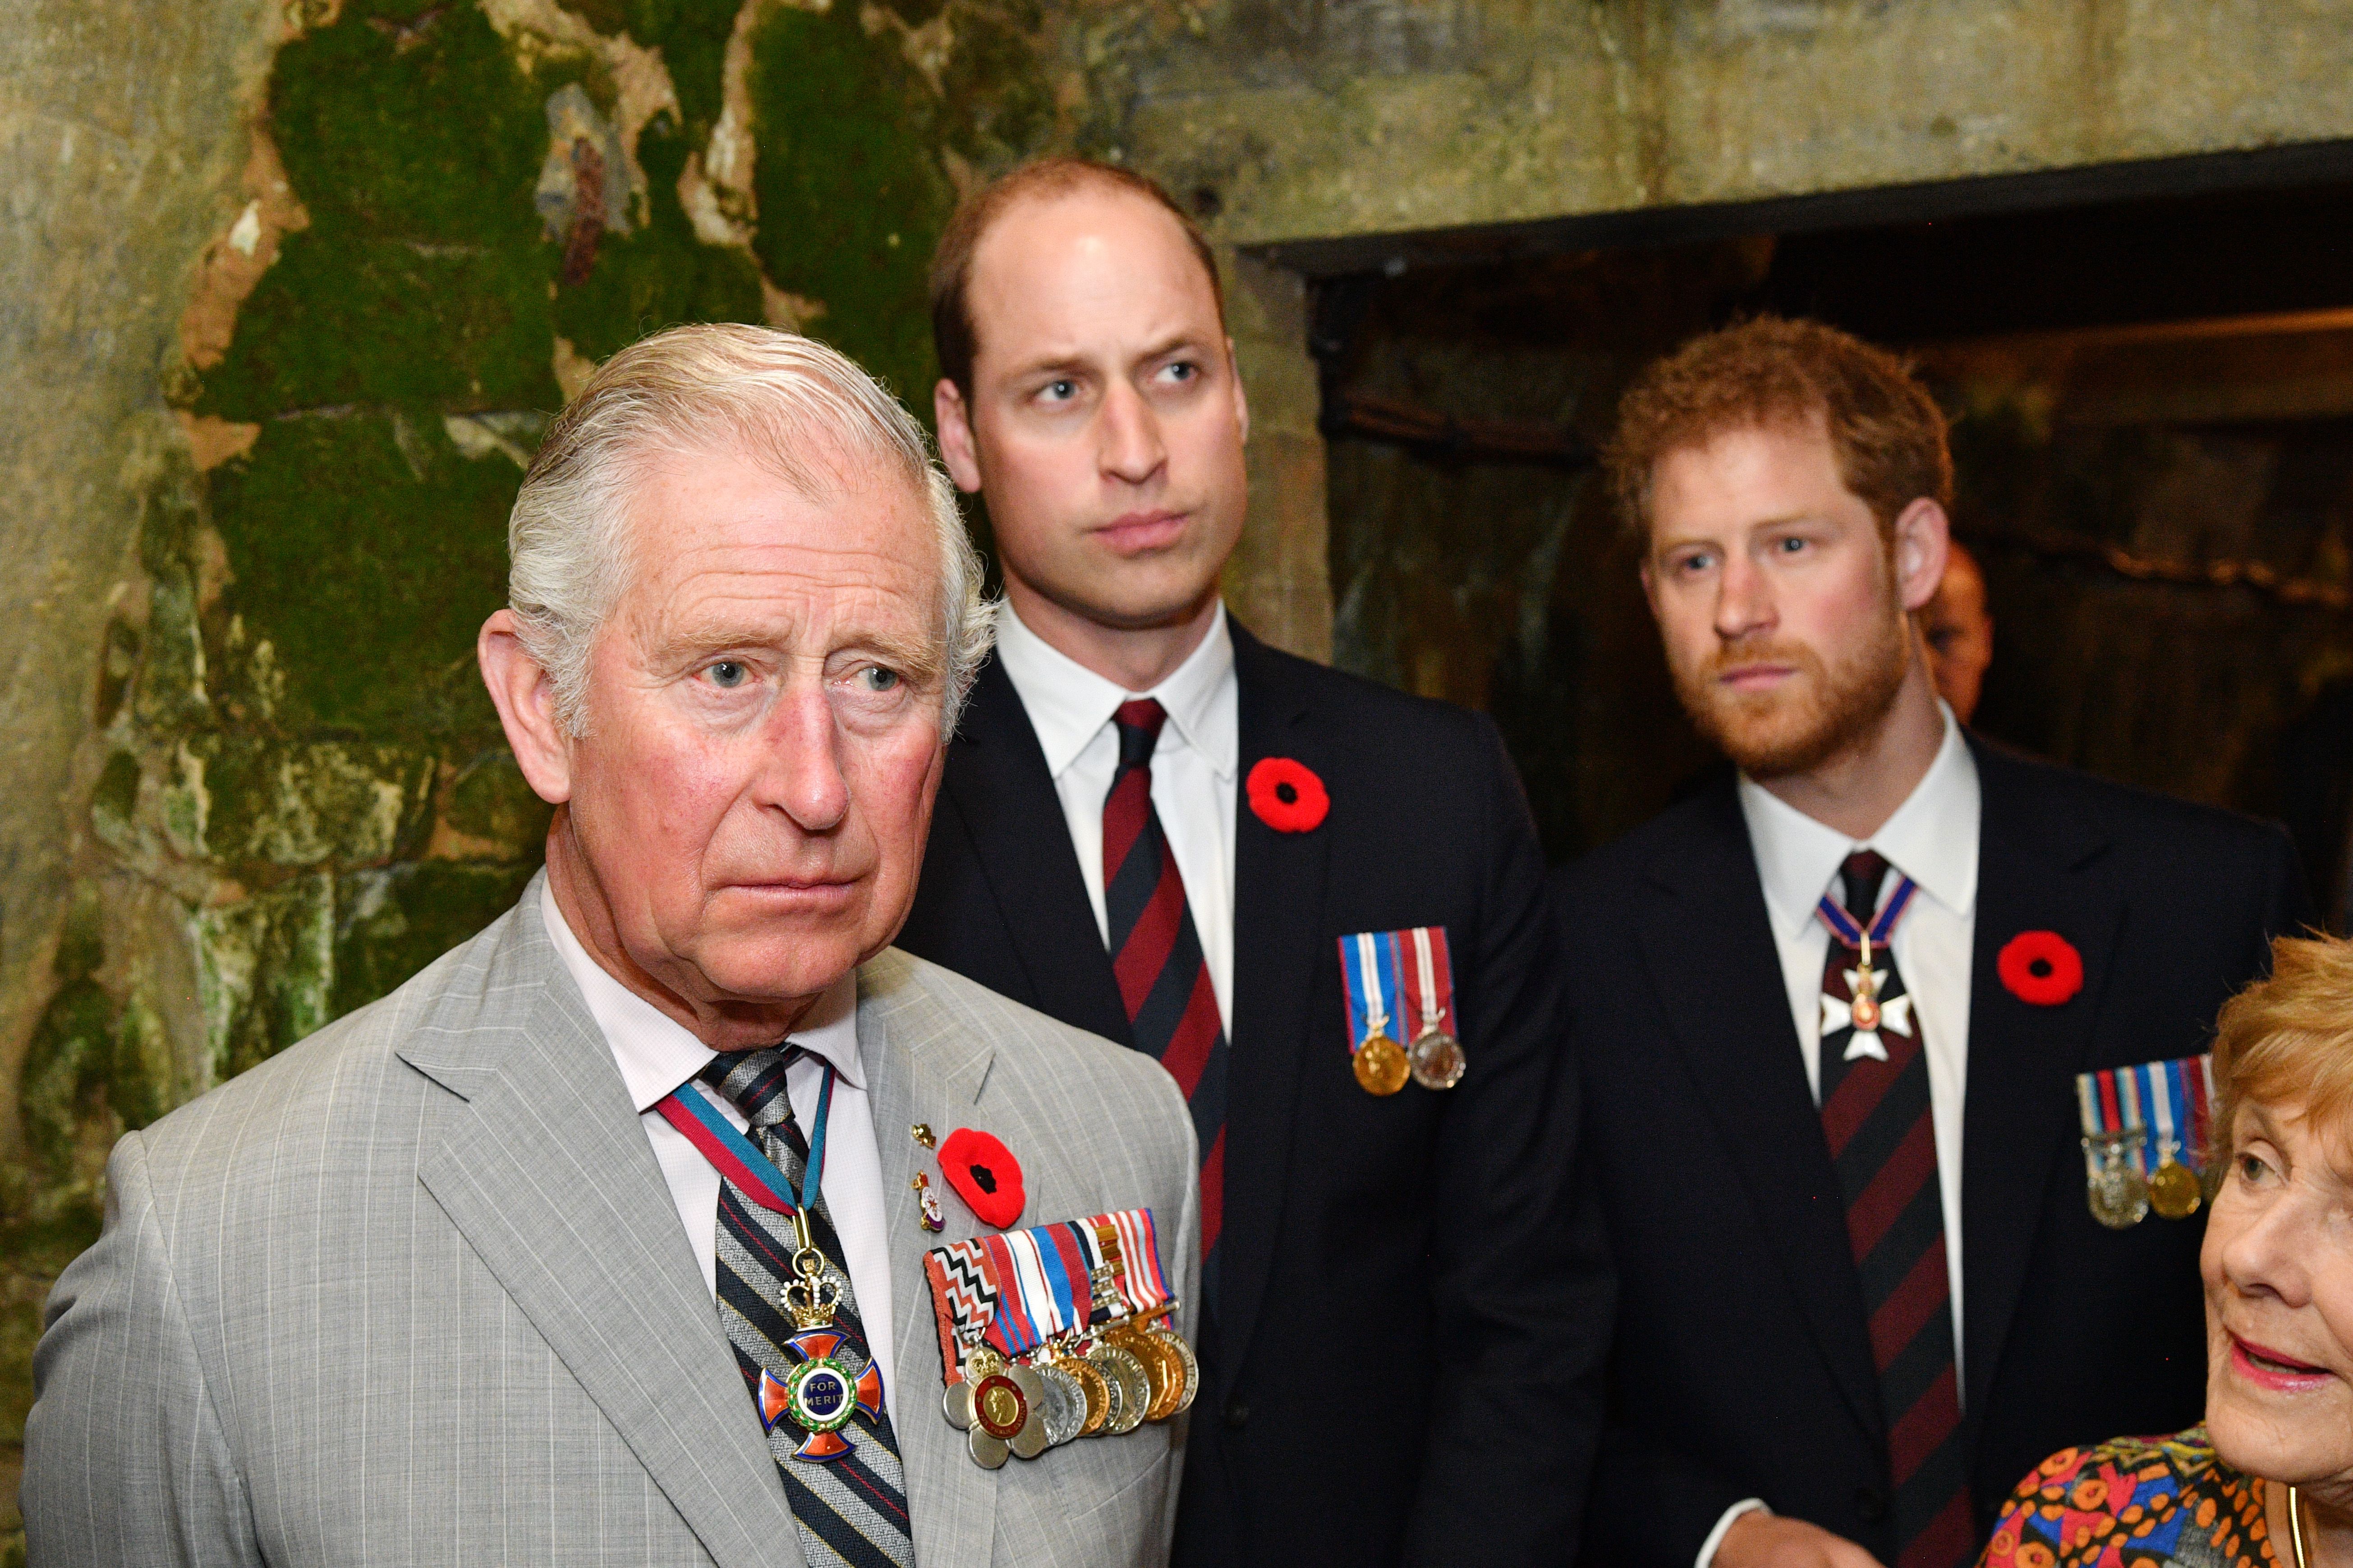 Prince Charles, Prince William and Prince Harry visit the tunnel and trenches at Vimy Memorial Park on April 9, 2017 in Vimy, France | Photo: Getty Images